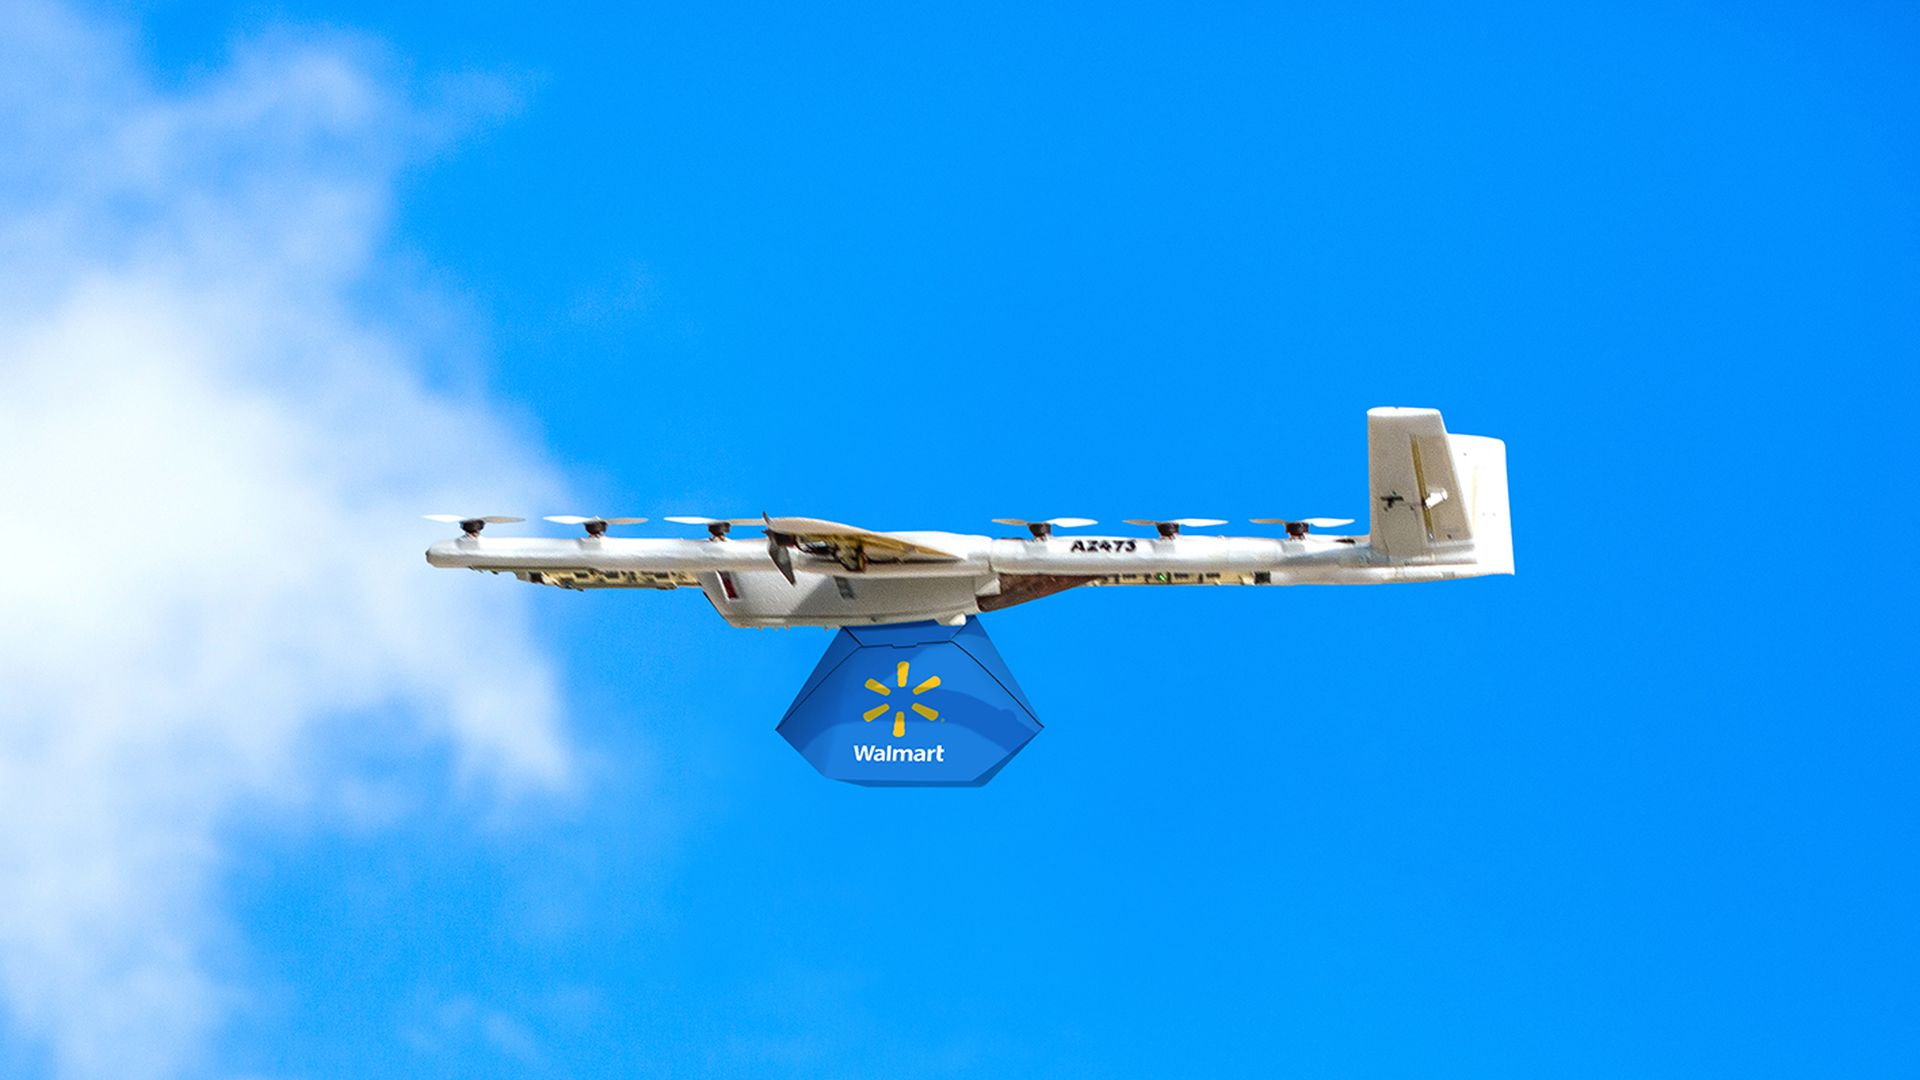 A drone in the sky with a "Walmart" box